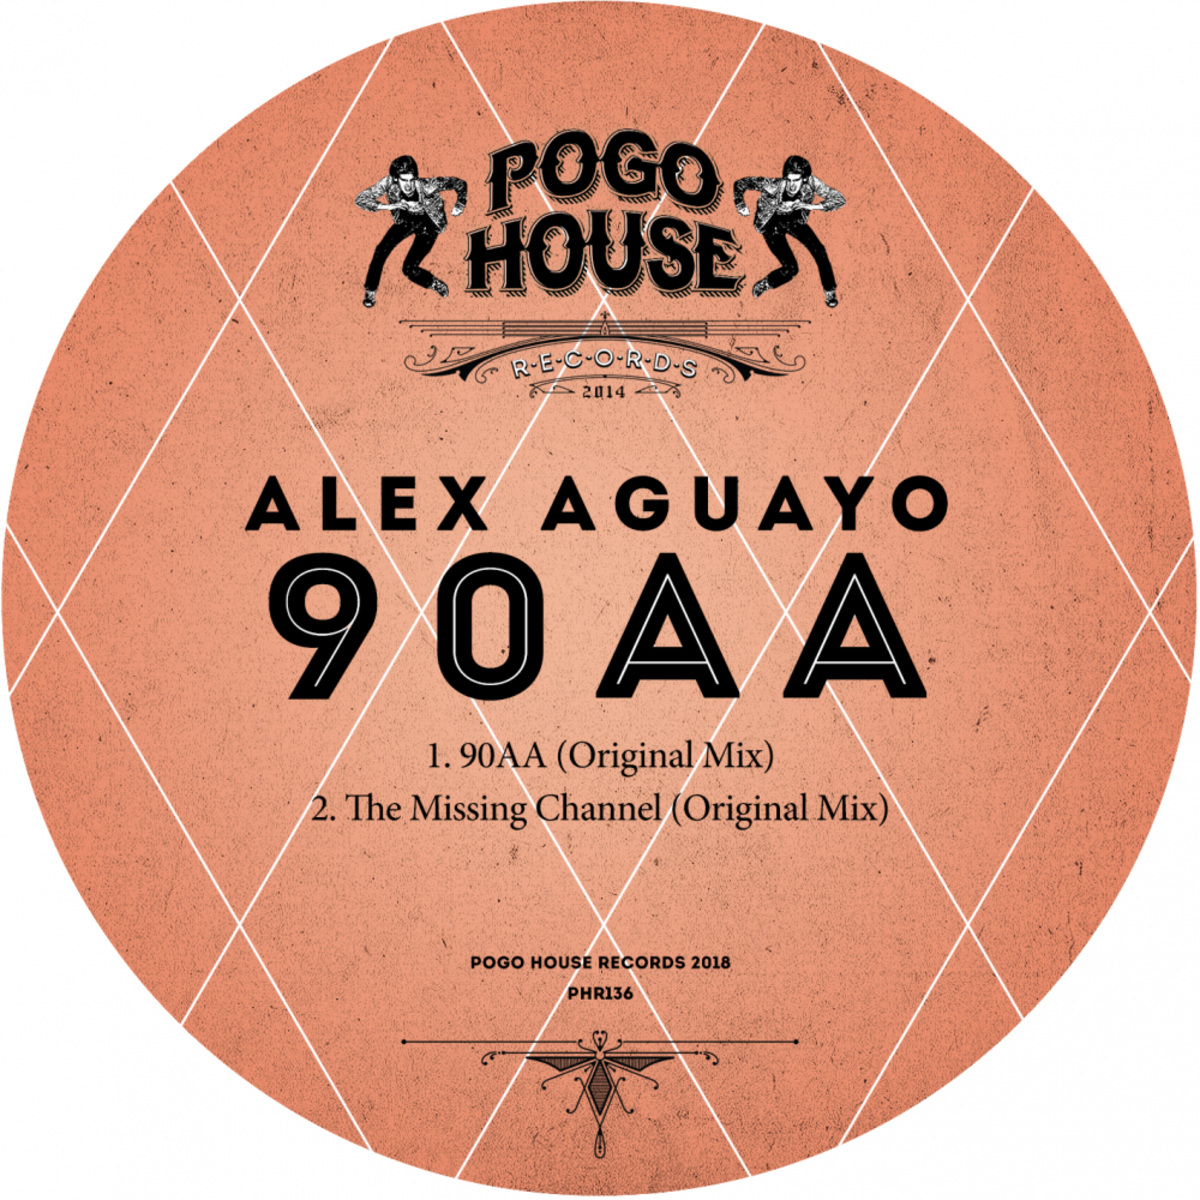 Alex Aguayo - The Missing Channel / Pogo House Records